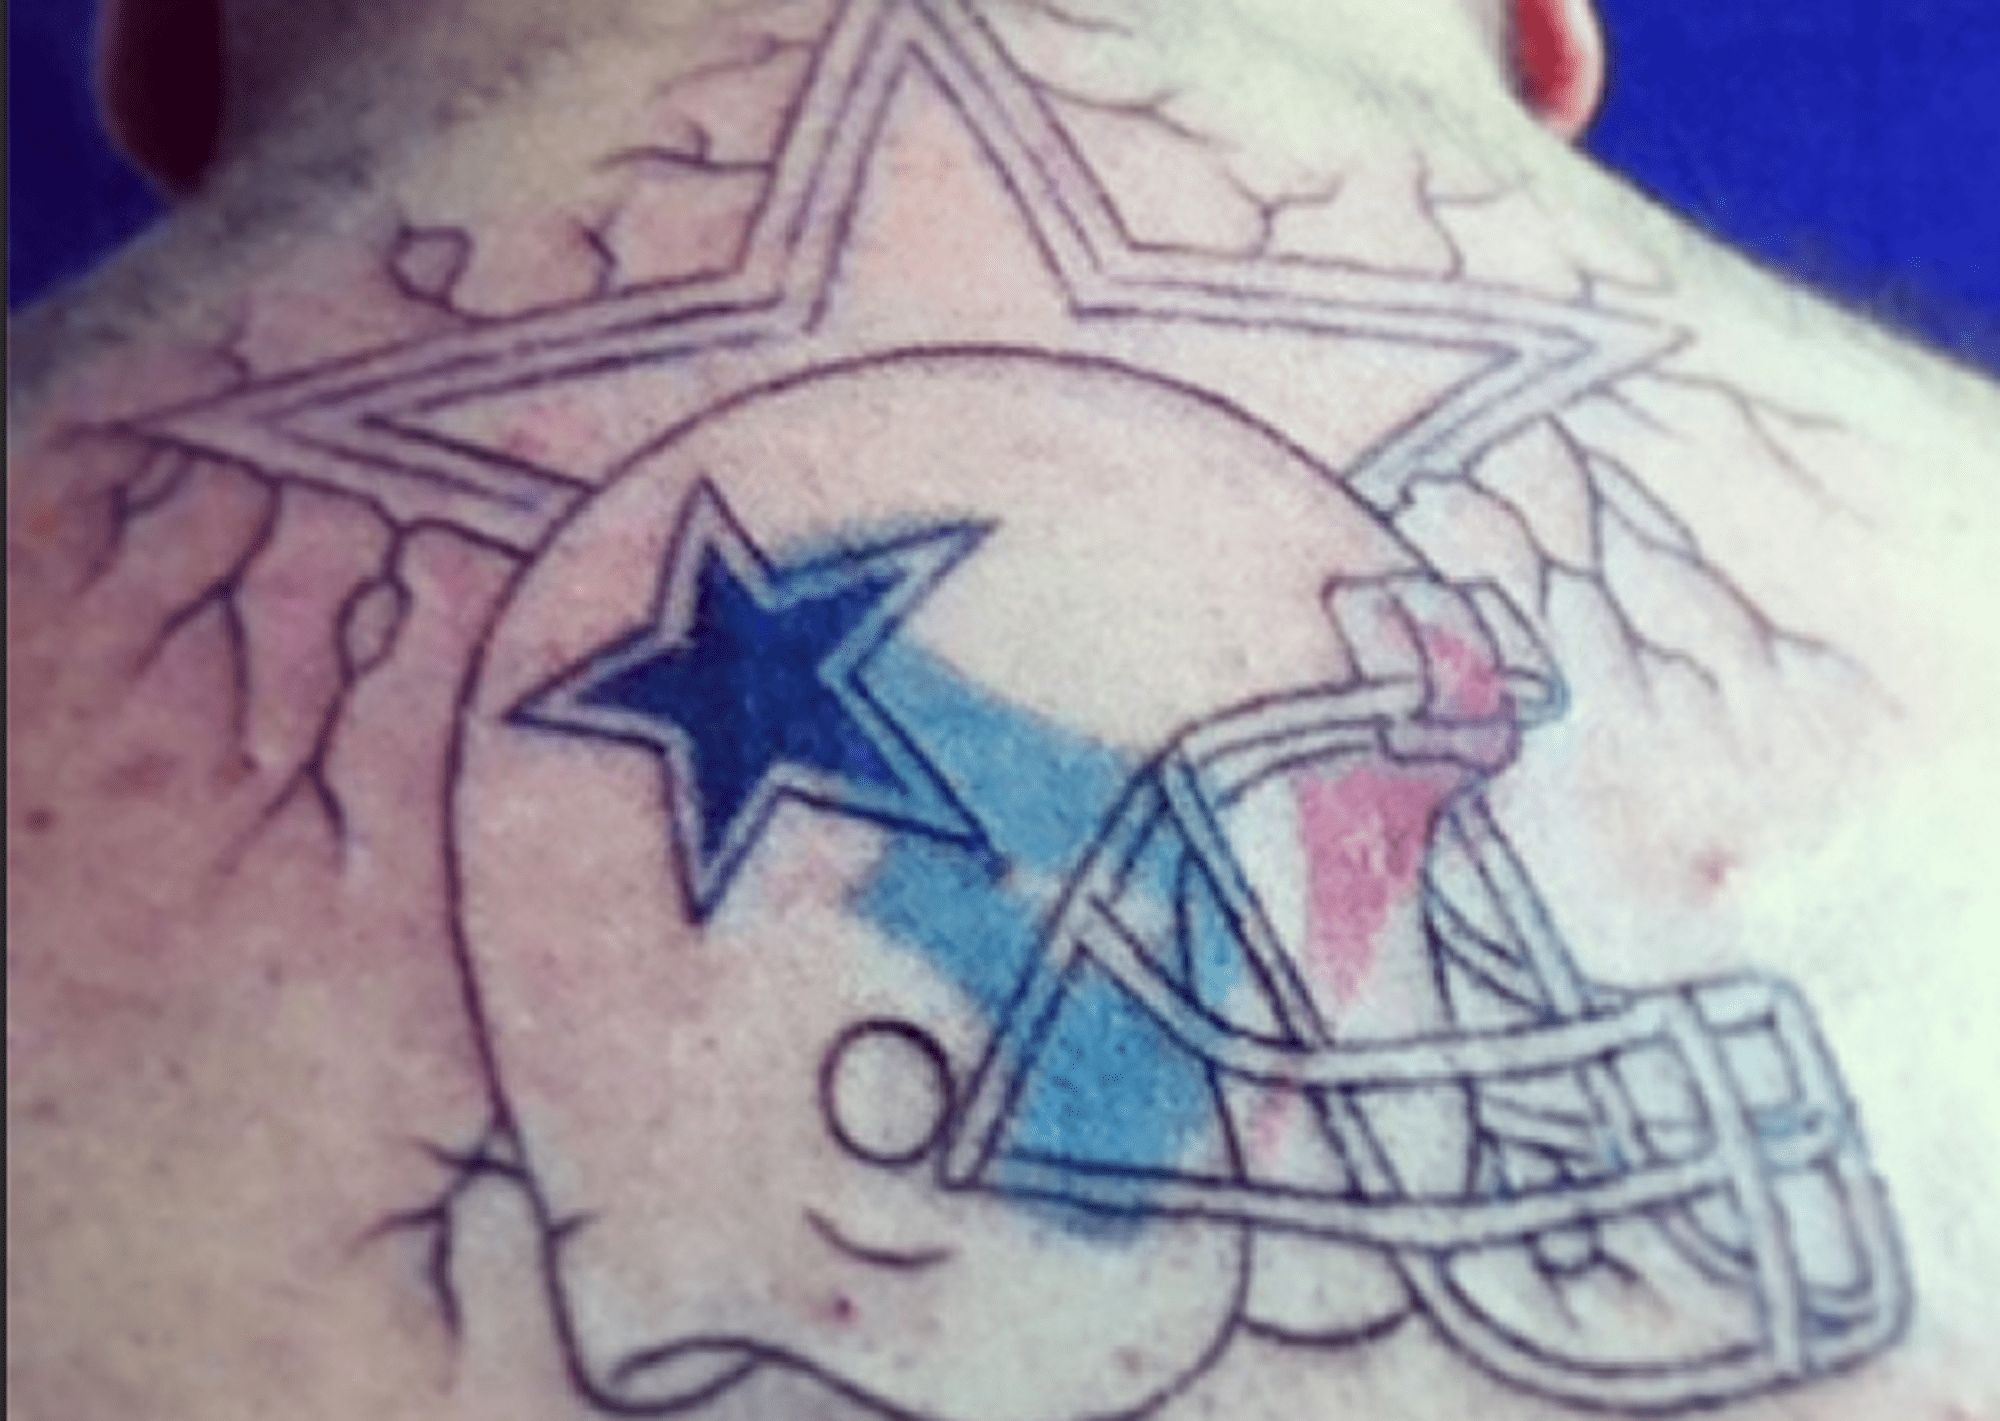 Cowboys fan gets Texans tattoo after losing bet